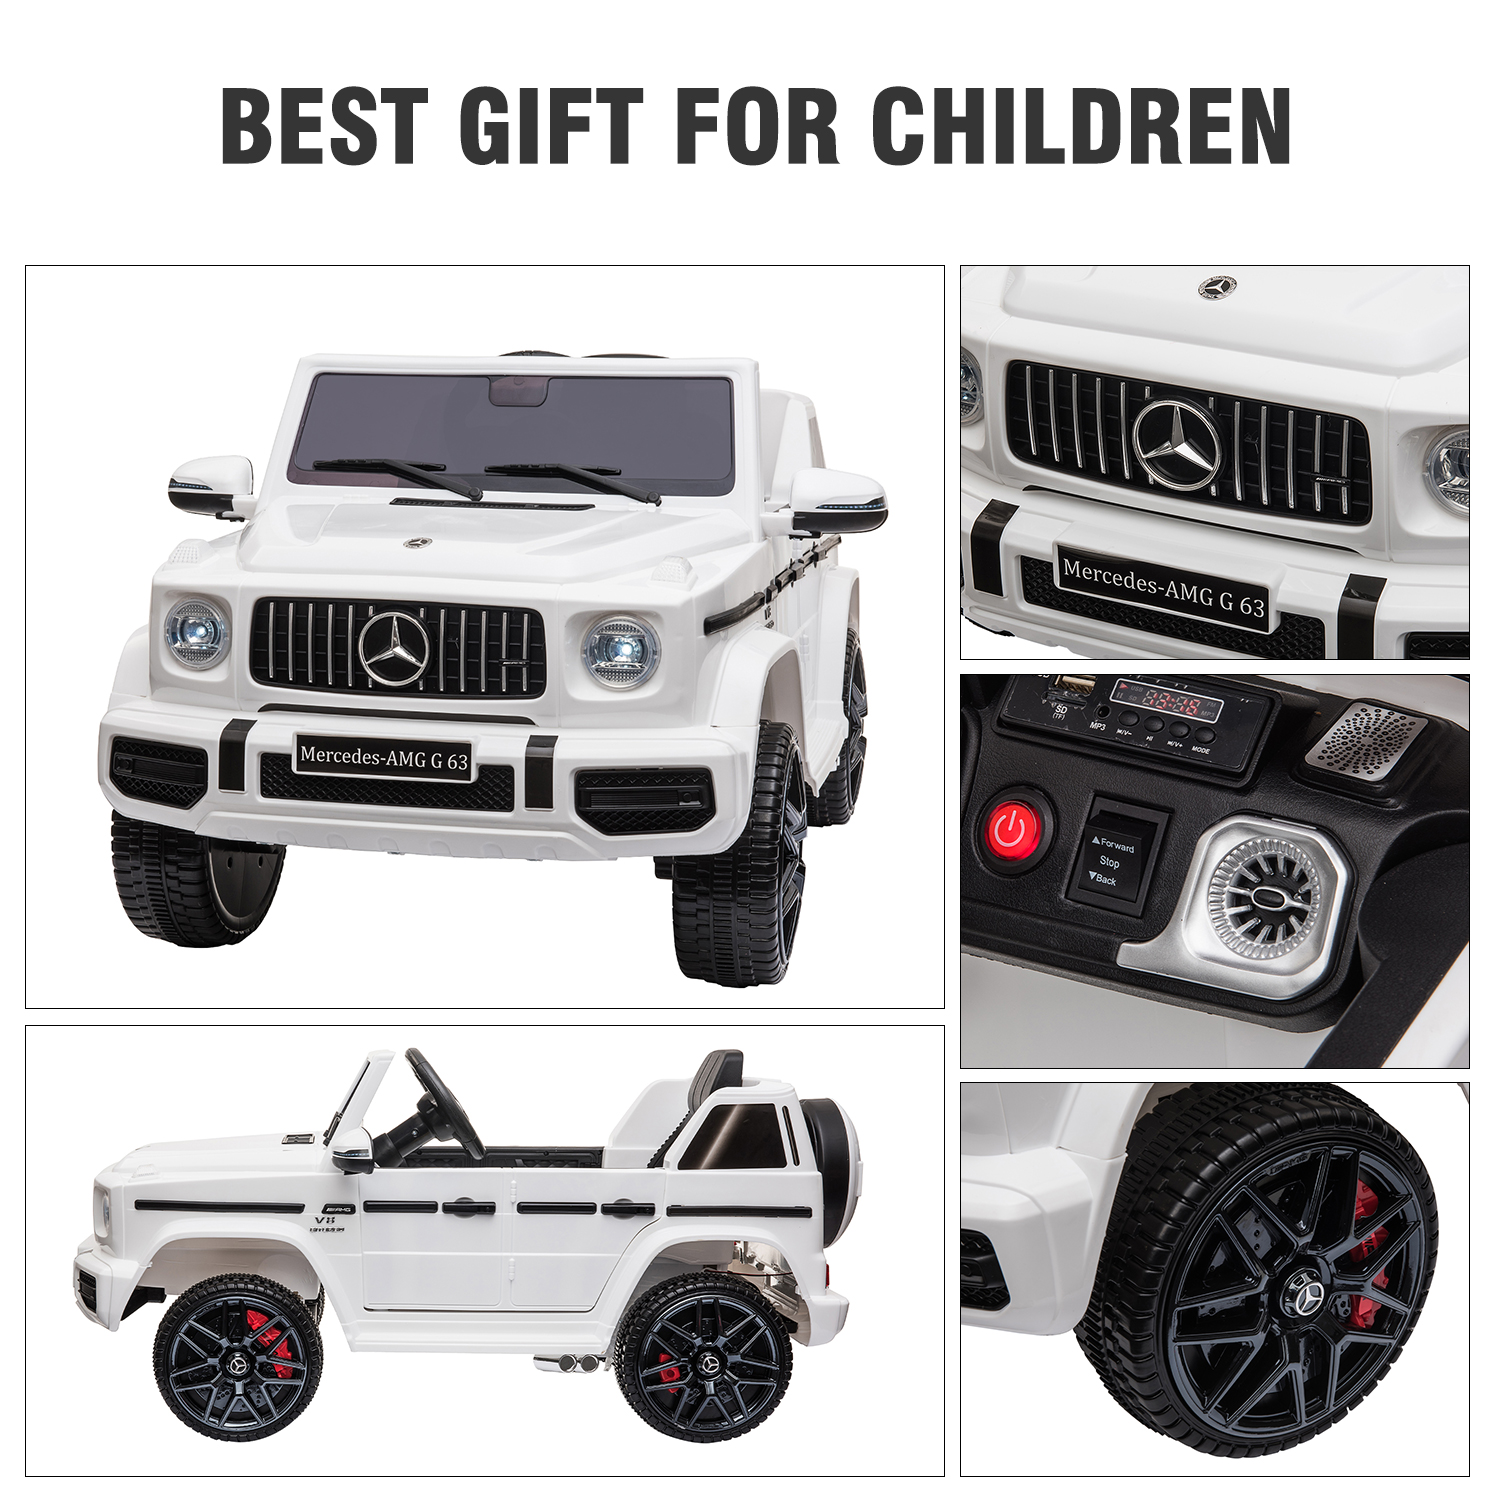 Tobbi 12V kids Ride On Jeep with Remote Control, Electric Car for Kids 3-6 Years,3 Speeds, Music Story Playing, LED Lights, MP3 Player